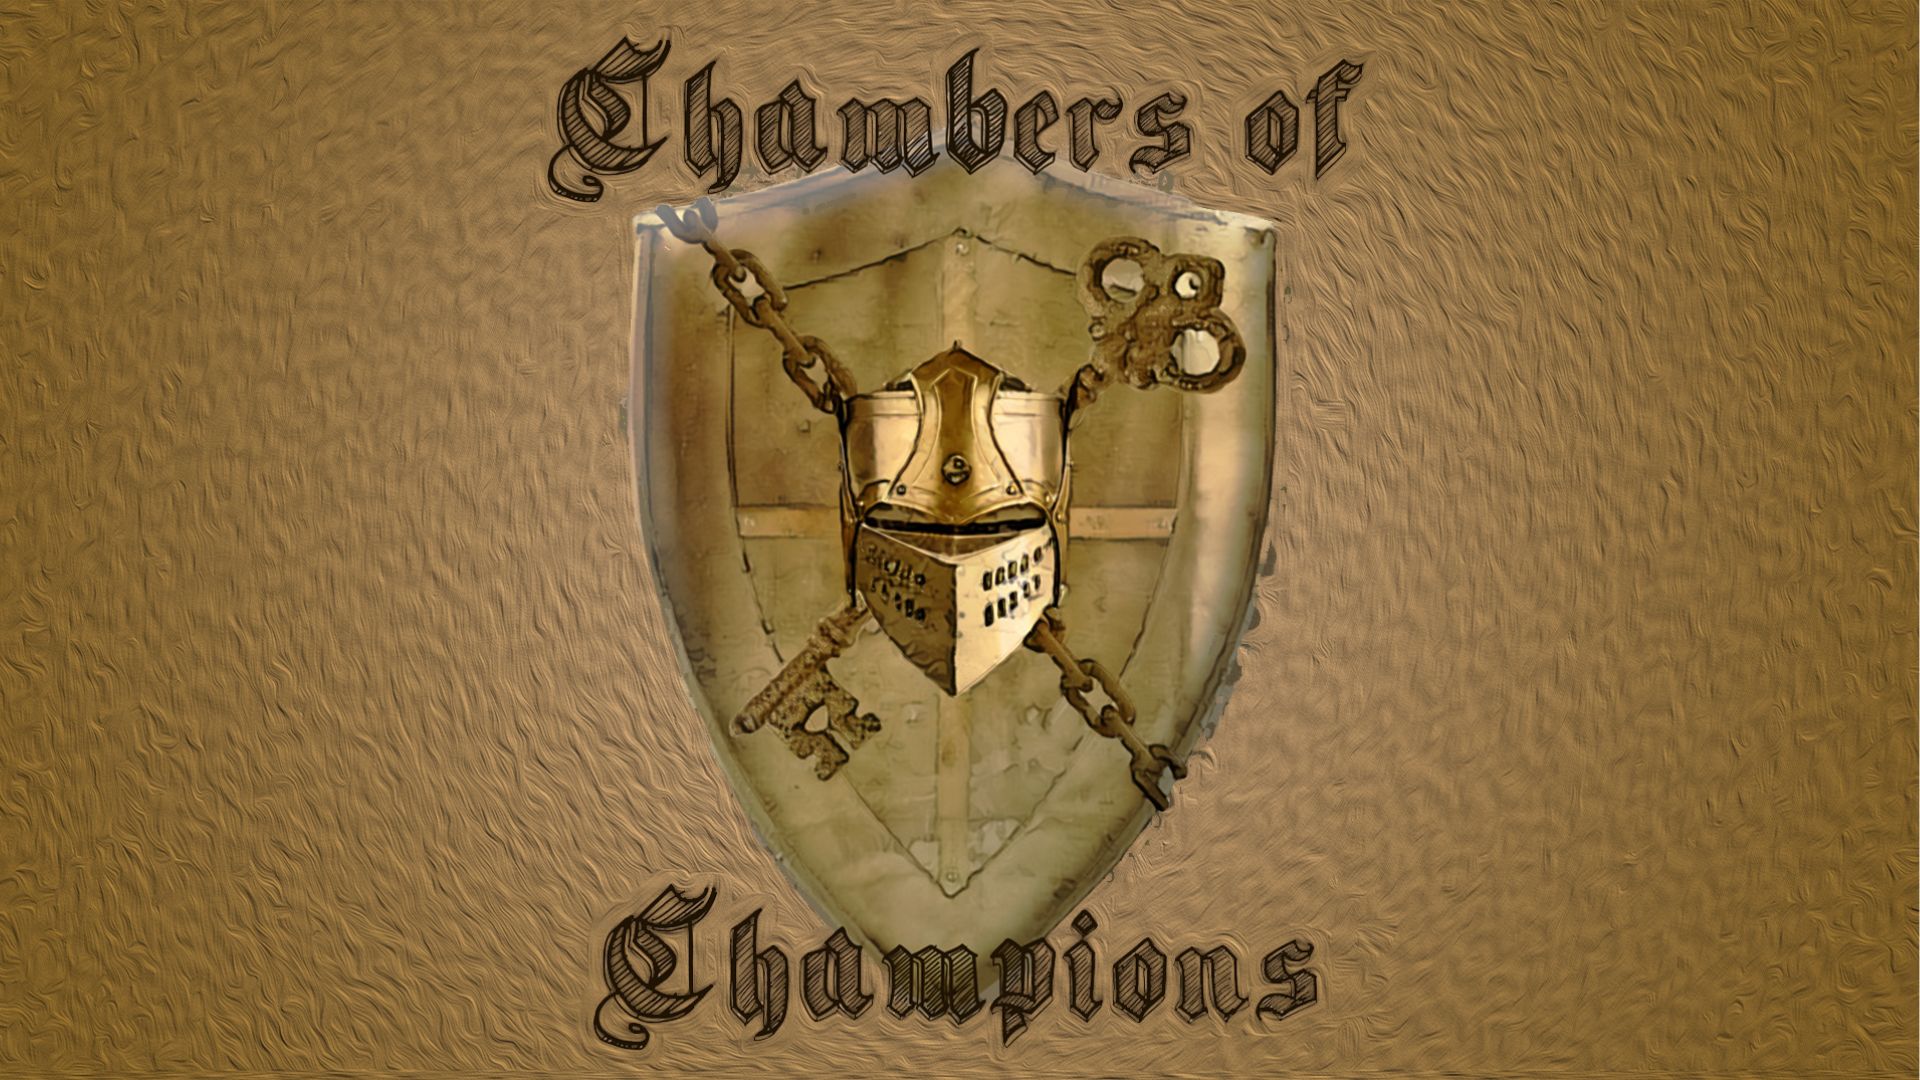 2 persons - Chambers of Champions